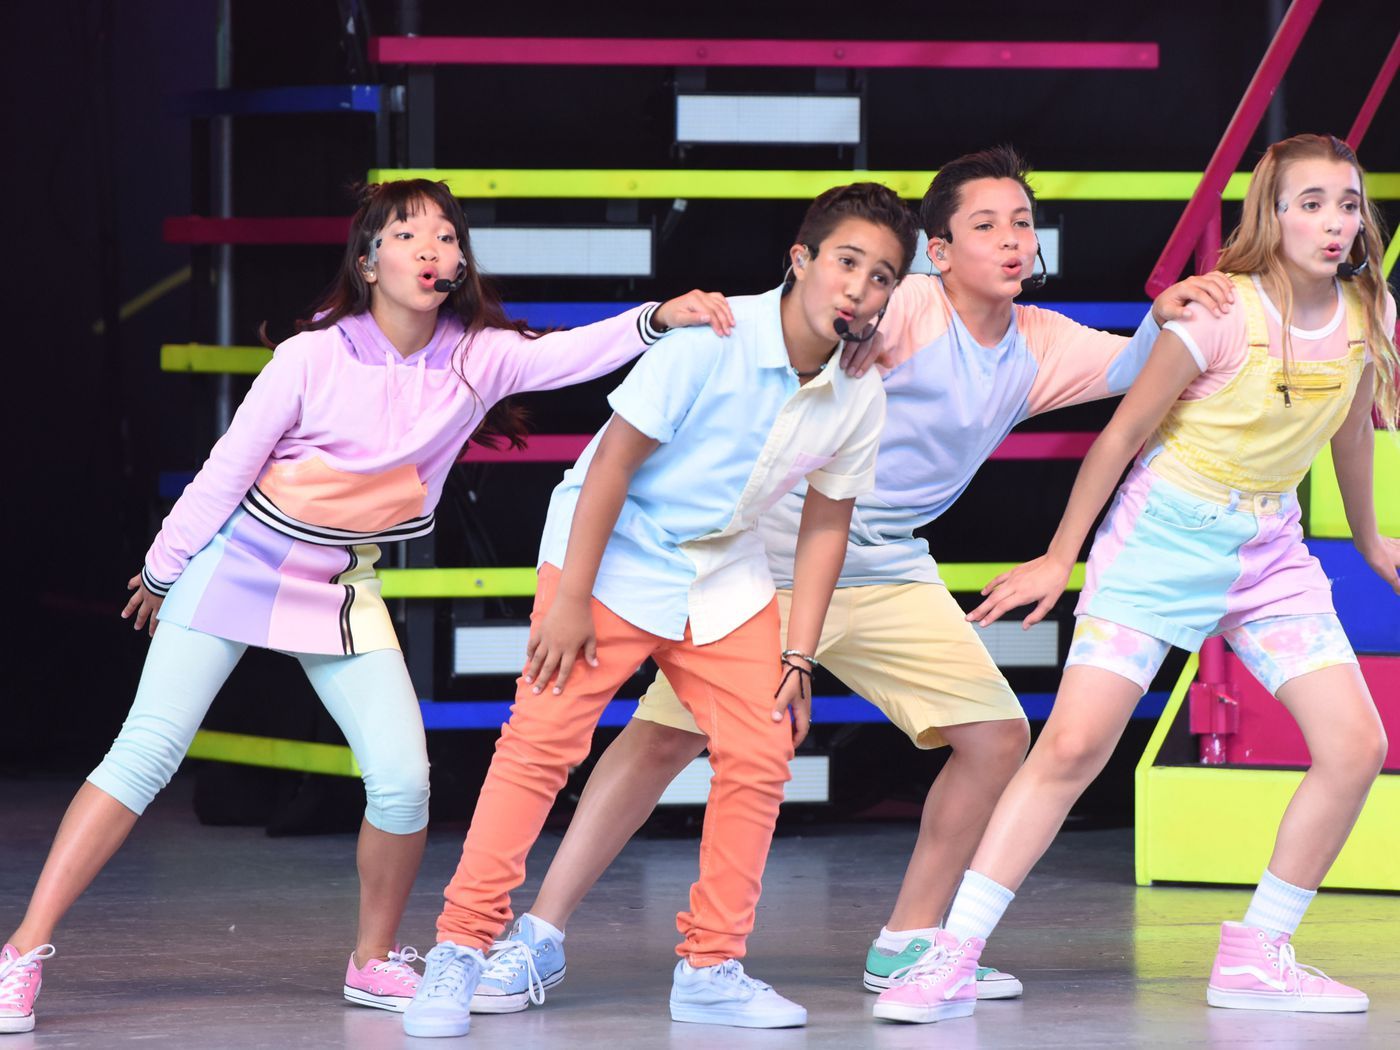 Why Kidz Bop's “censored” music is problematic